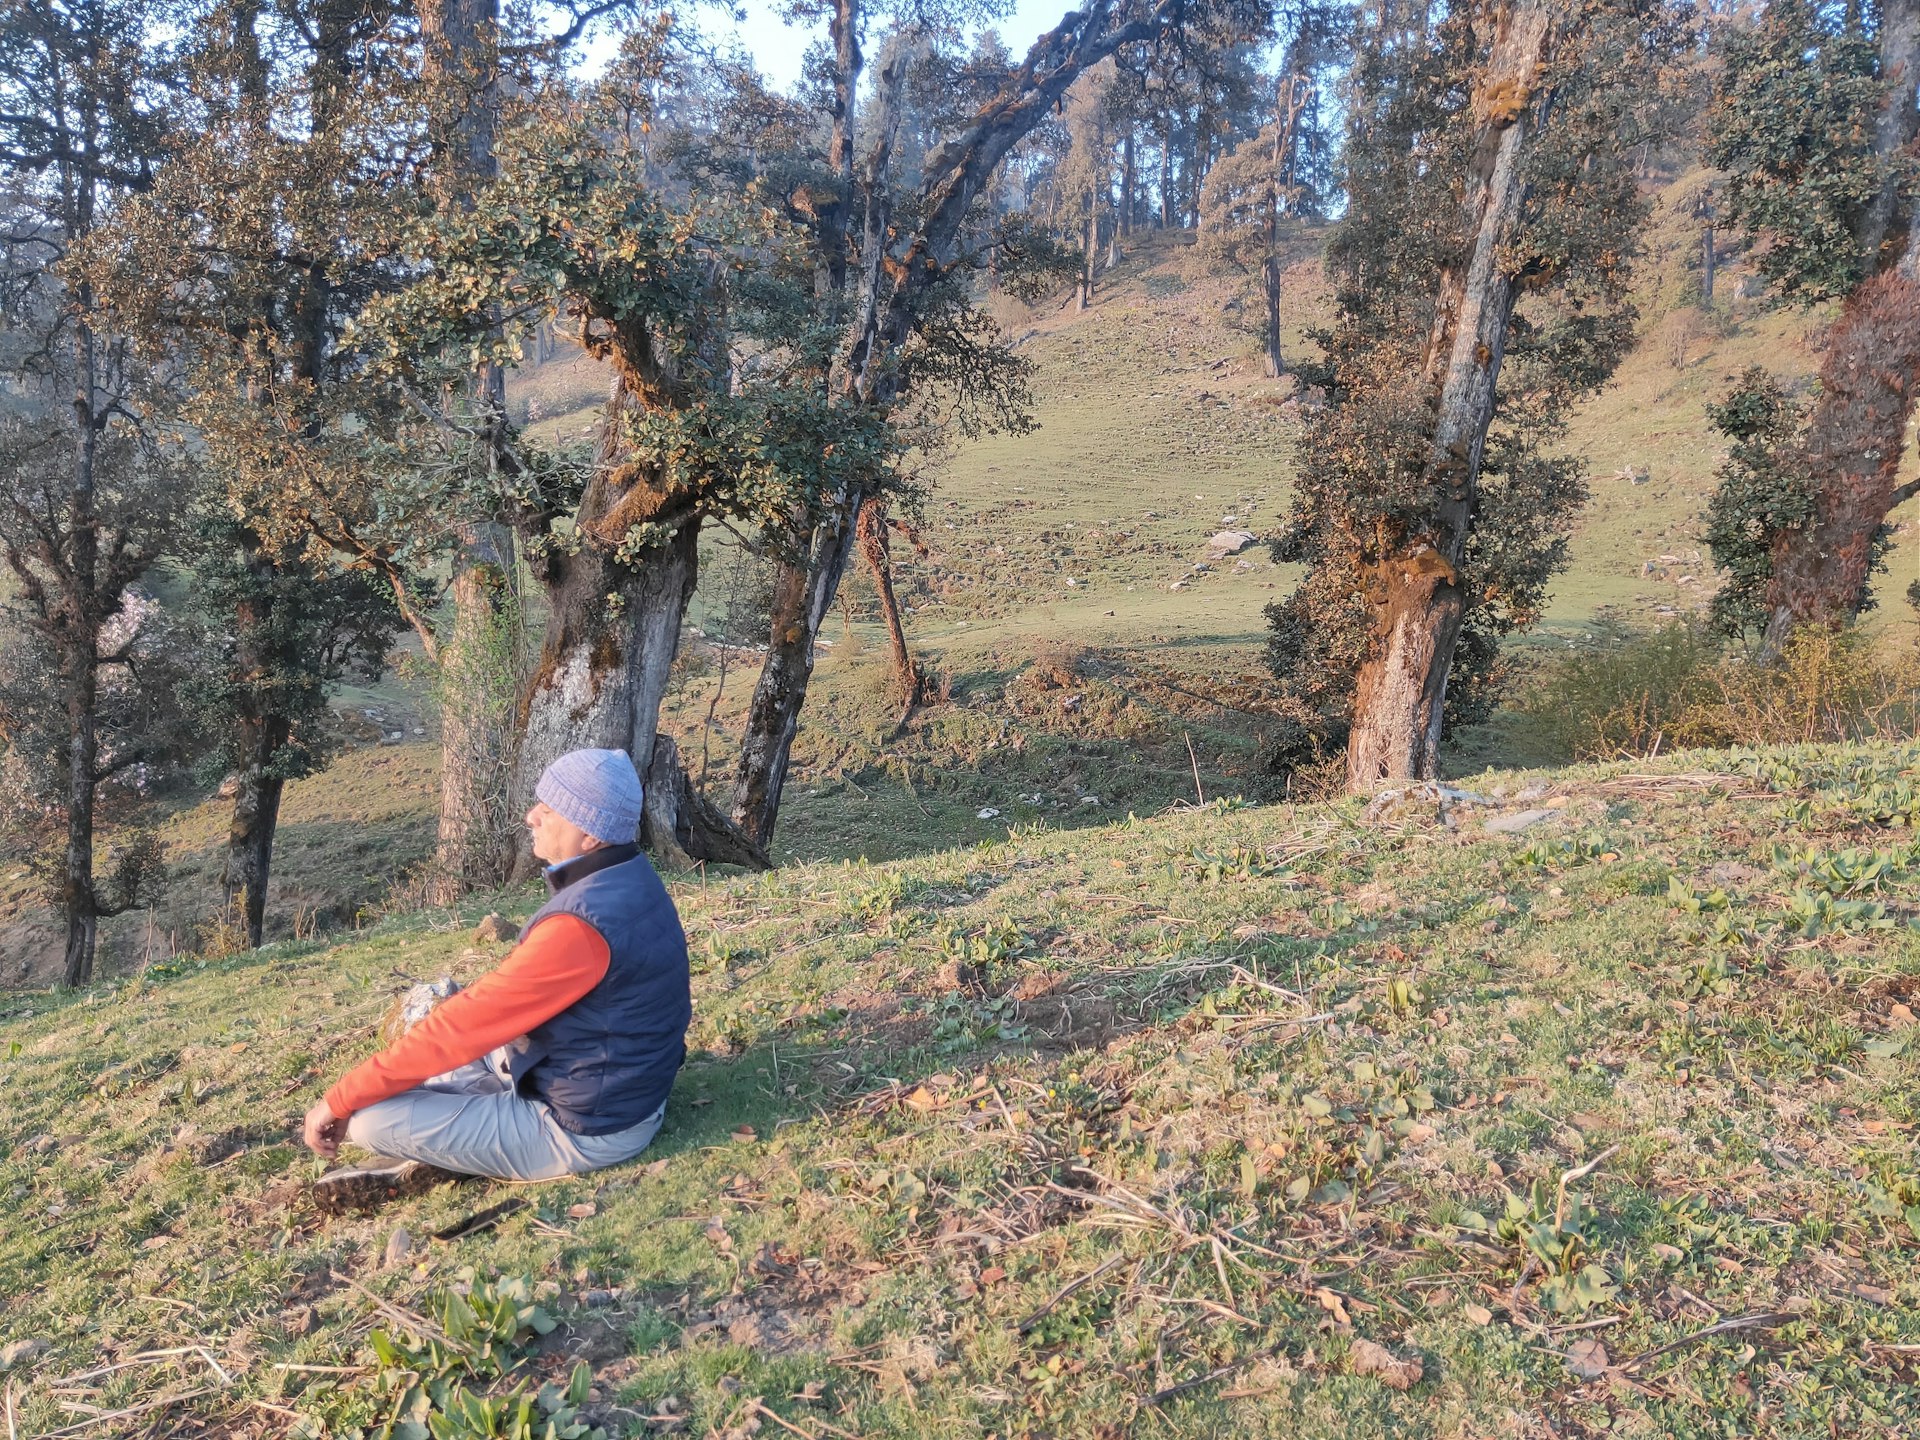 A man sits in a lotus pose on a hillside during a trek in Uttarakhand, India